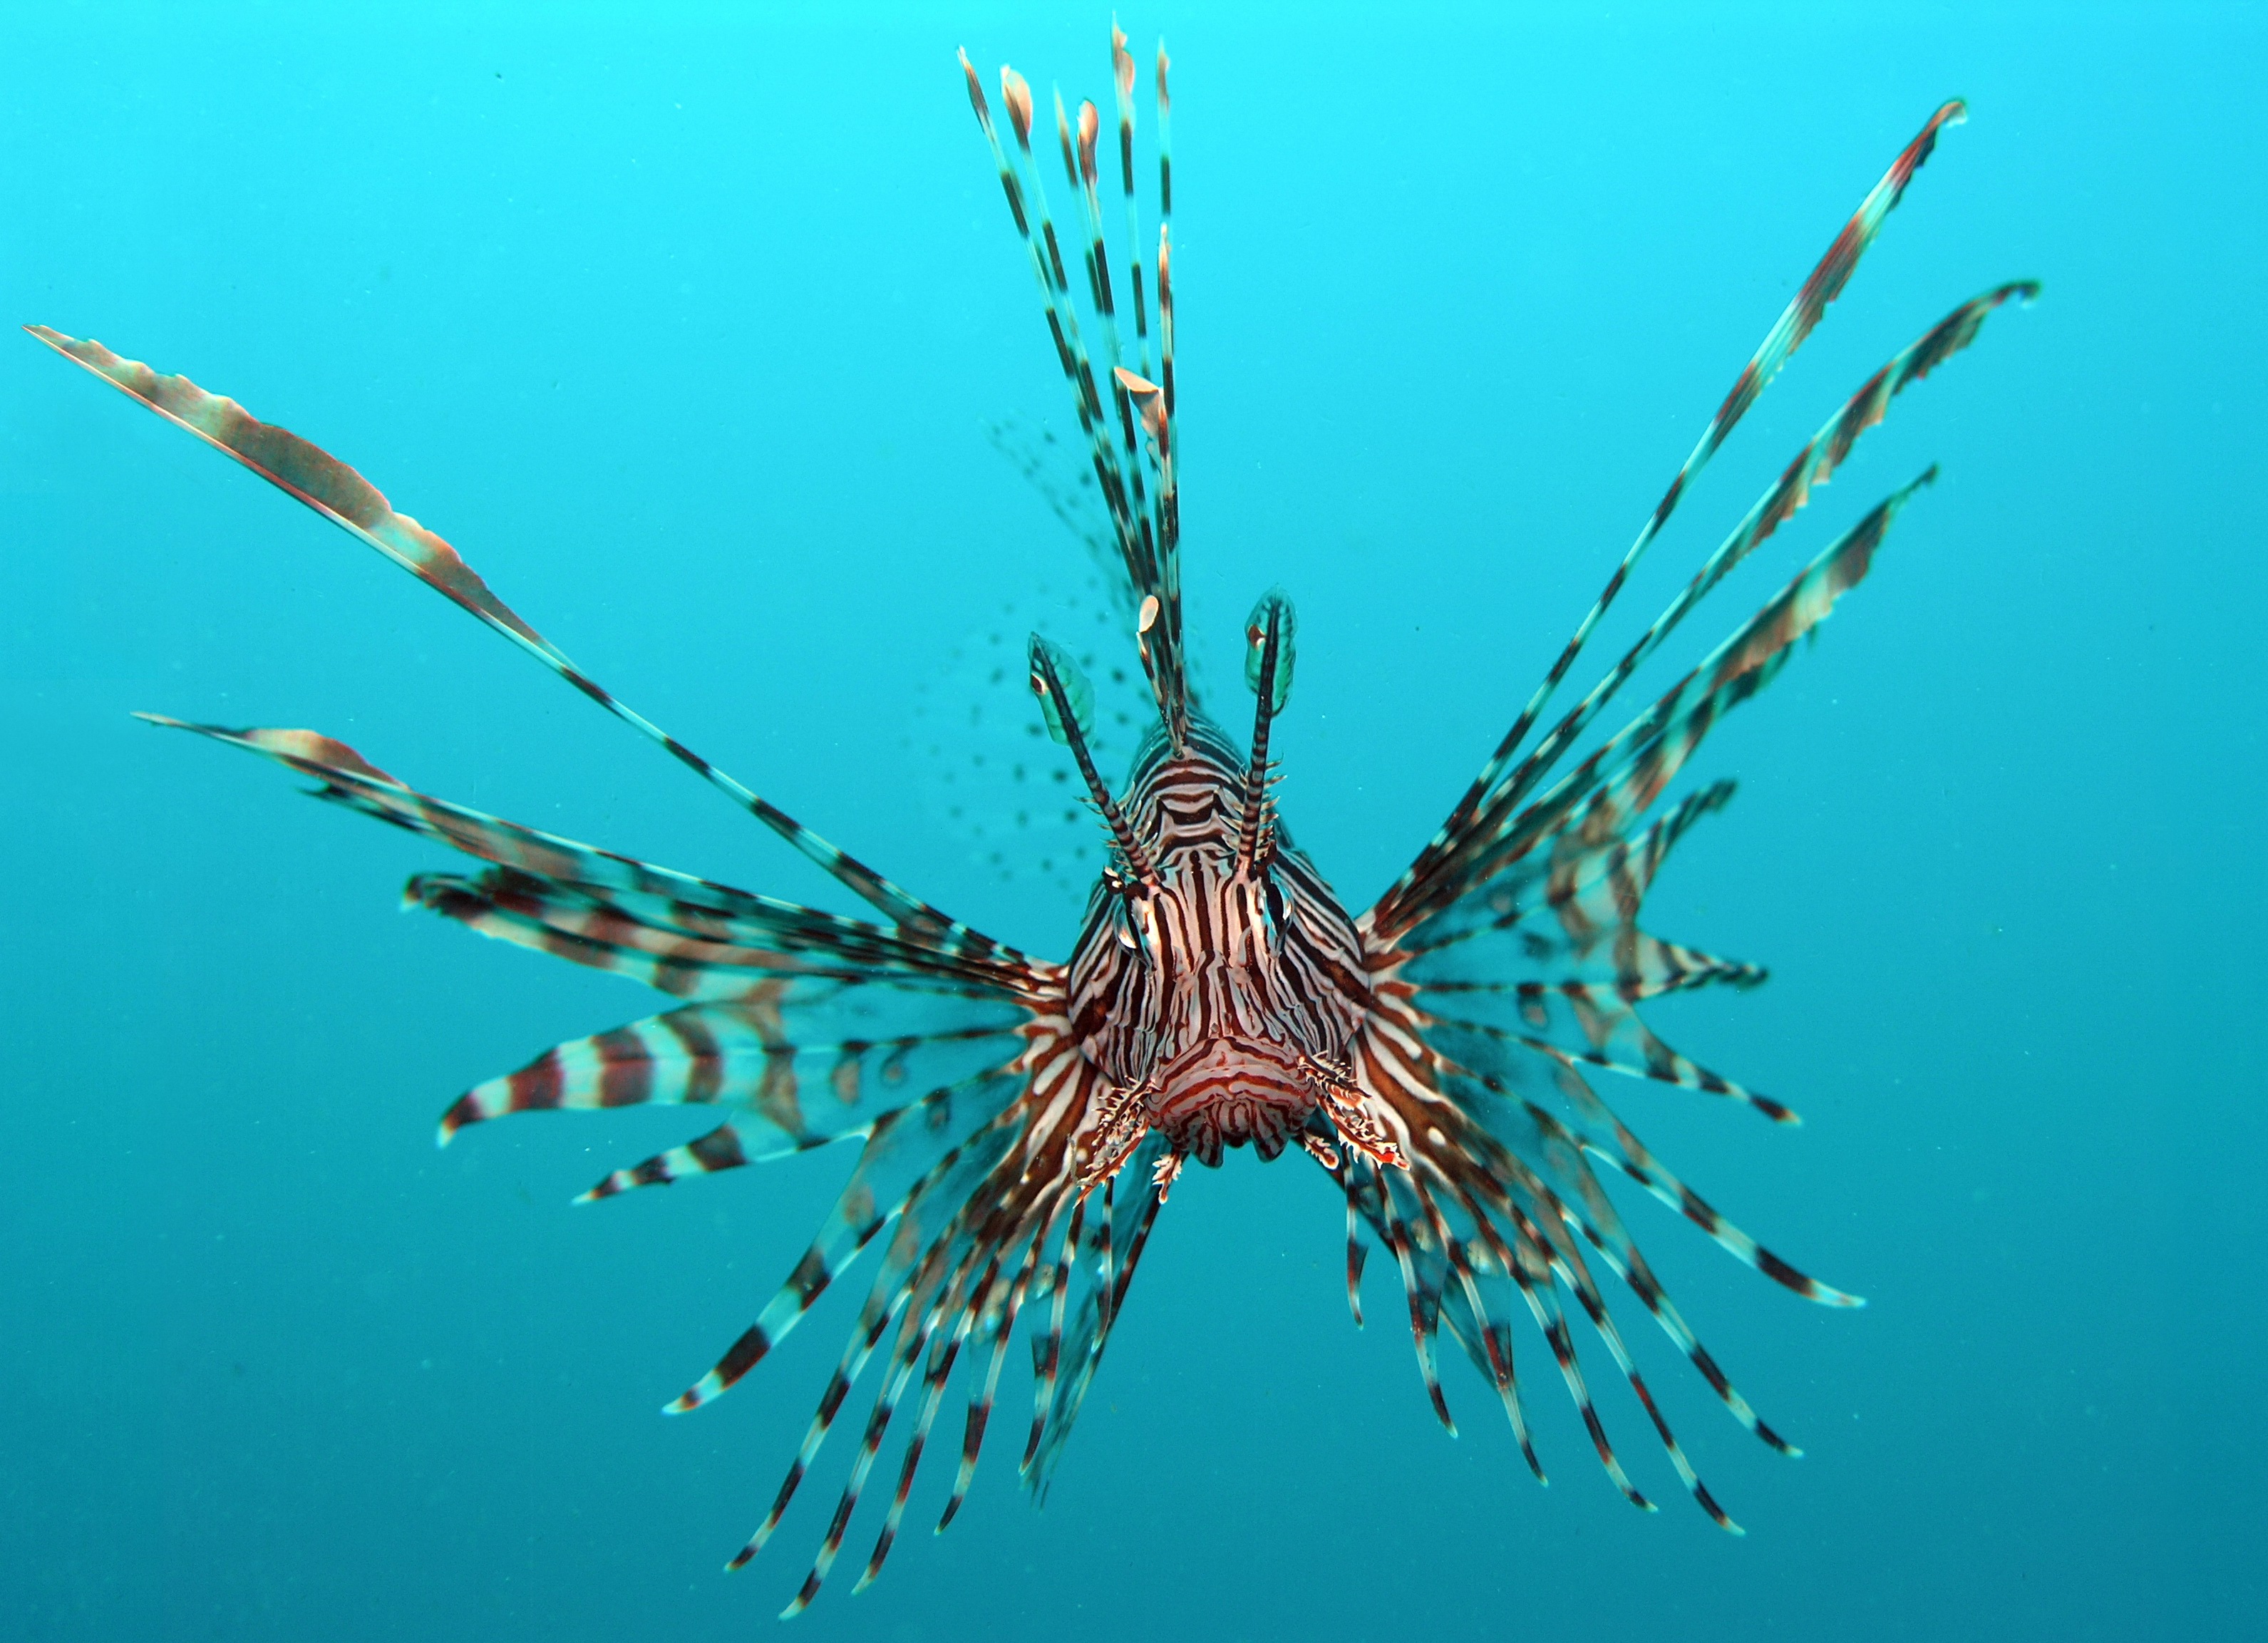 The Red Lionfish have a truly spectacular appearance, but in fact they're very dangerous creatures